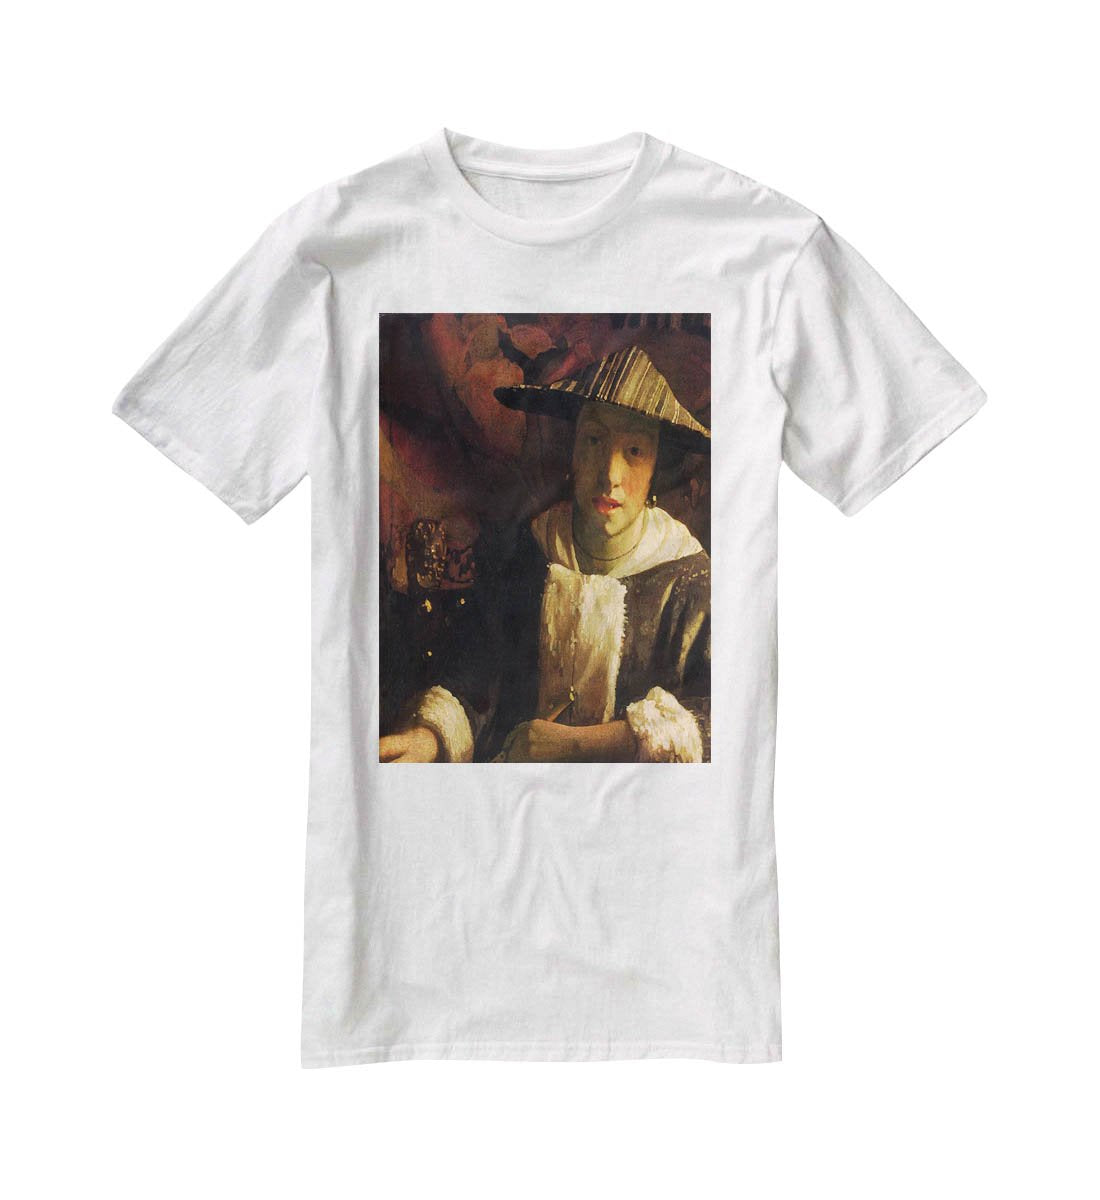 Girl with a flute by Vermeer T-Shirt - Canvas Art Rocks - 5